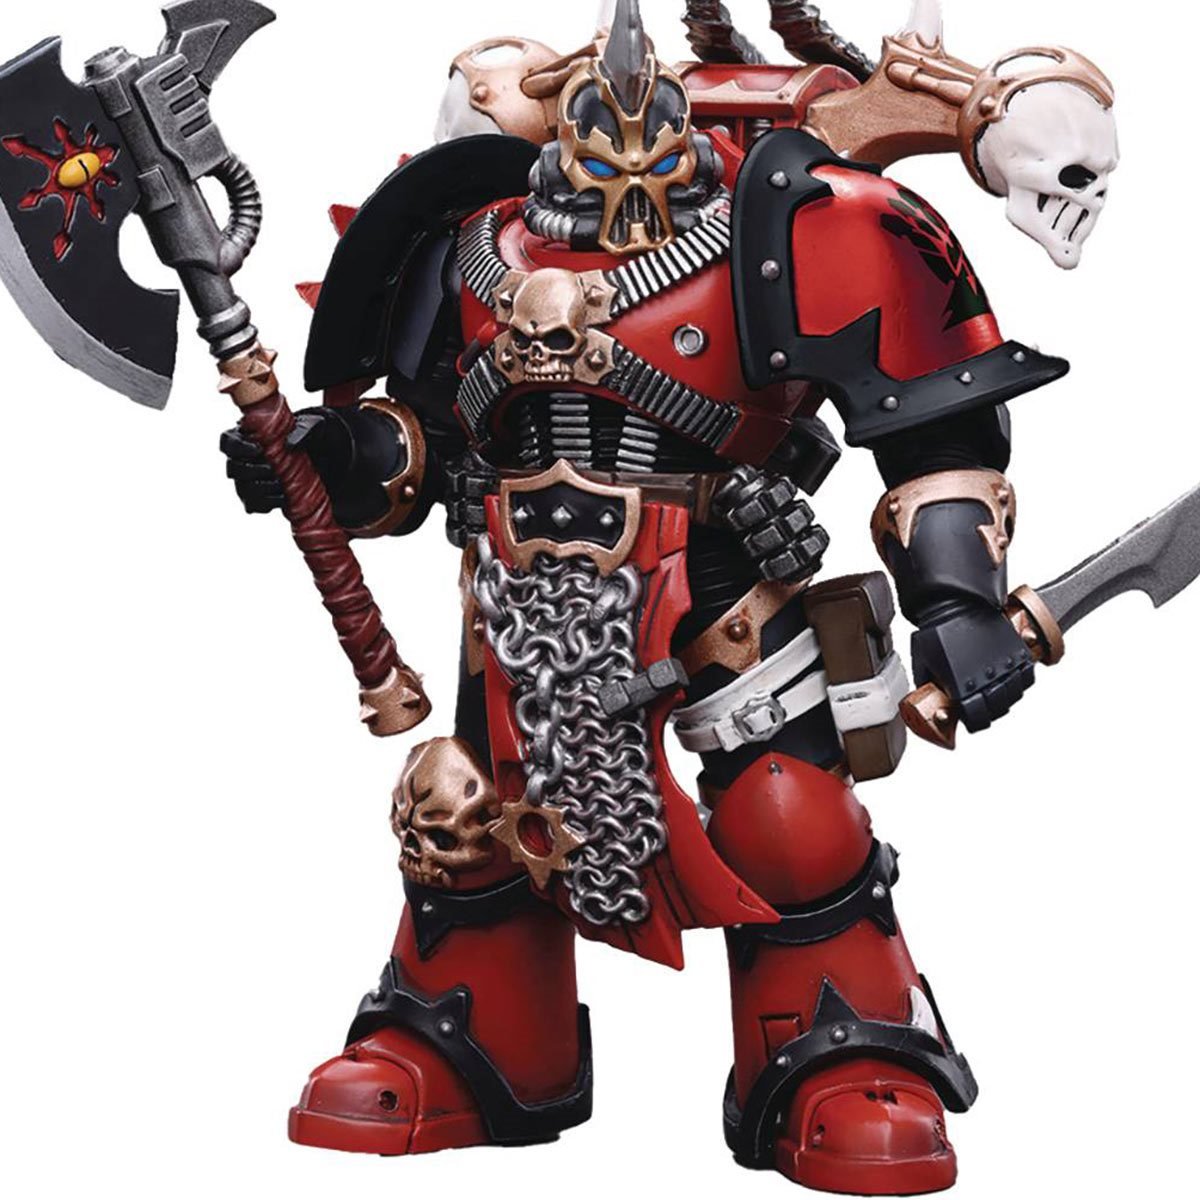 Toy 40,000 Chaos Space Marines Red Corsairs Exalted Champion Gotor Blade 1:18 Scale Action Figure